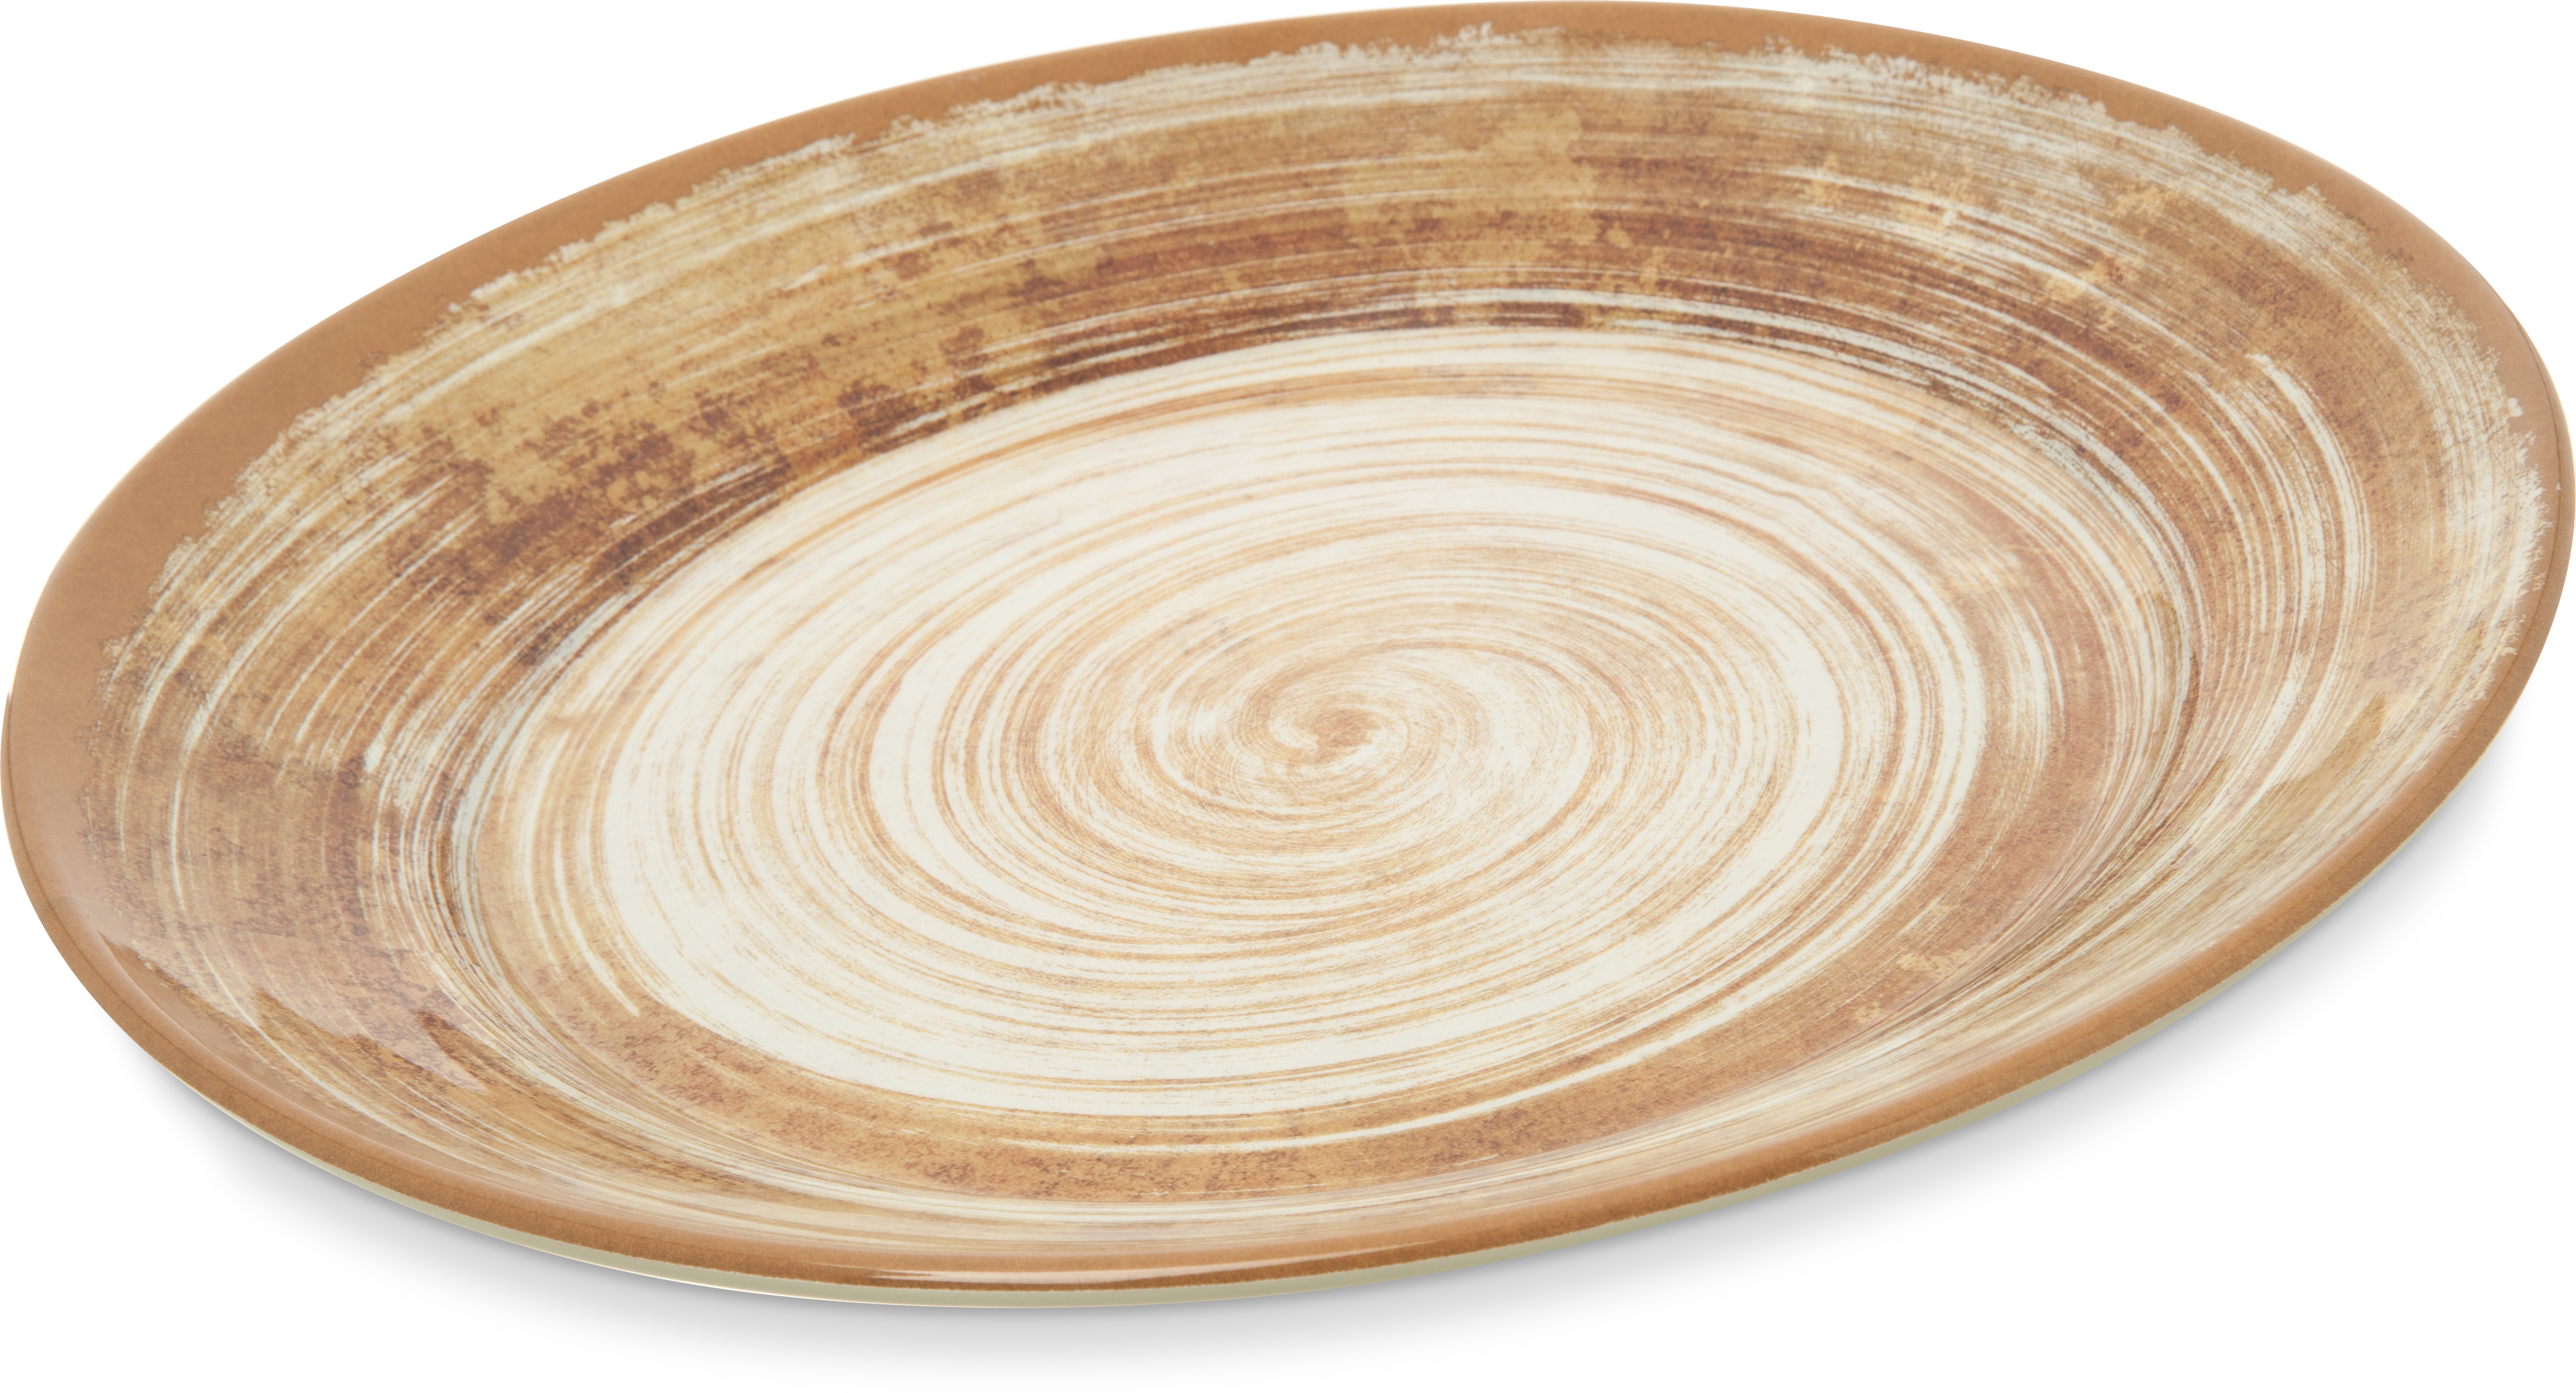 Mingle Melamine Round Charger 12.5 - Copper